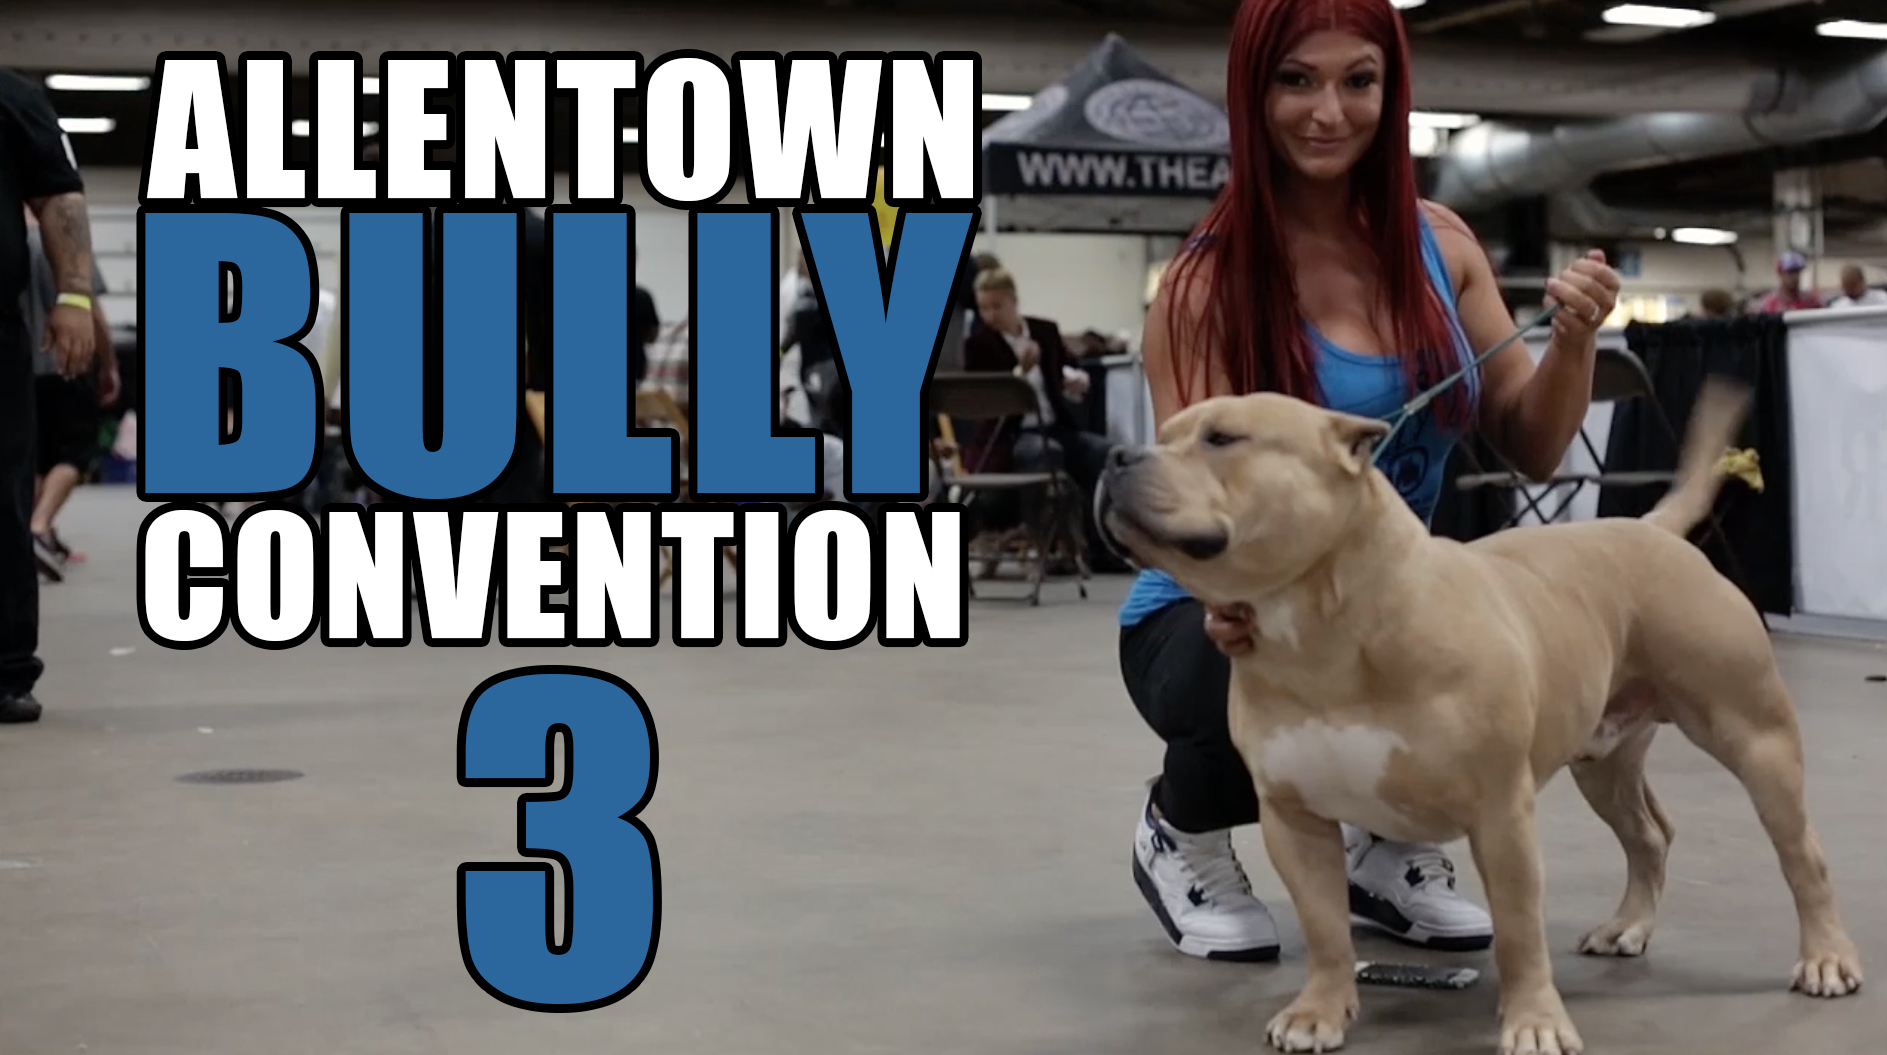 allentown-bully-convention-3